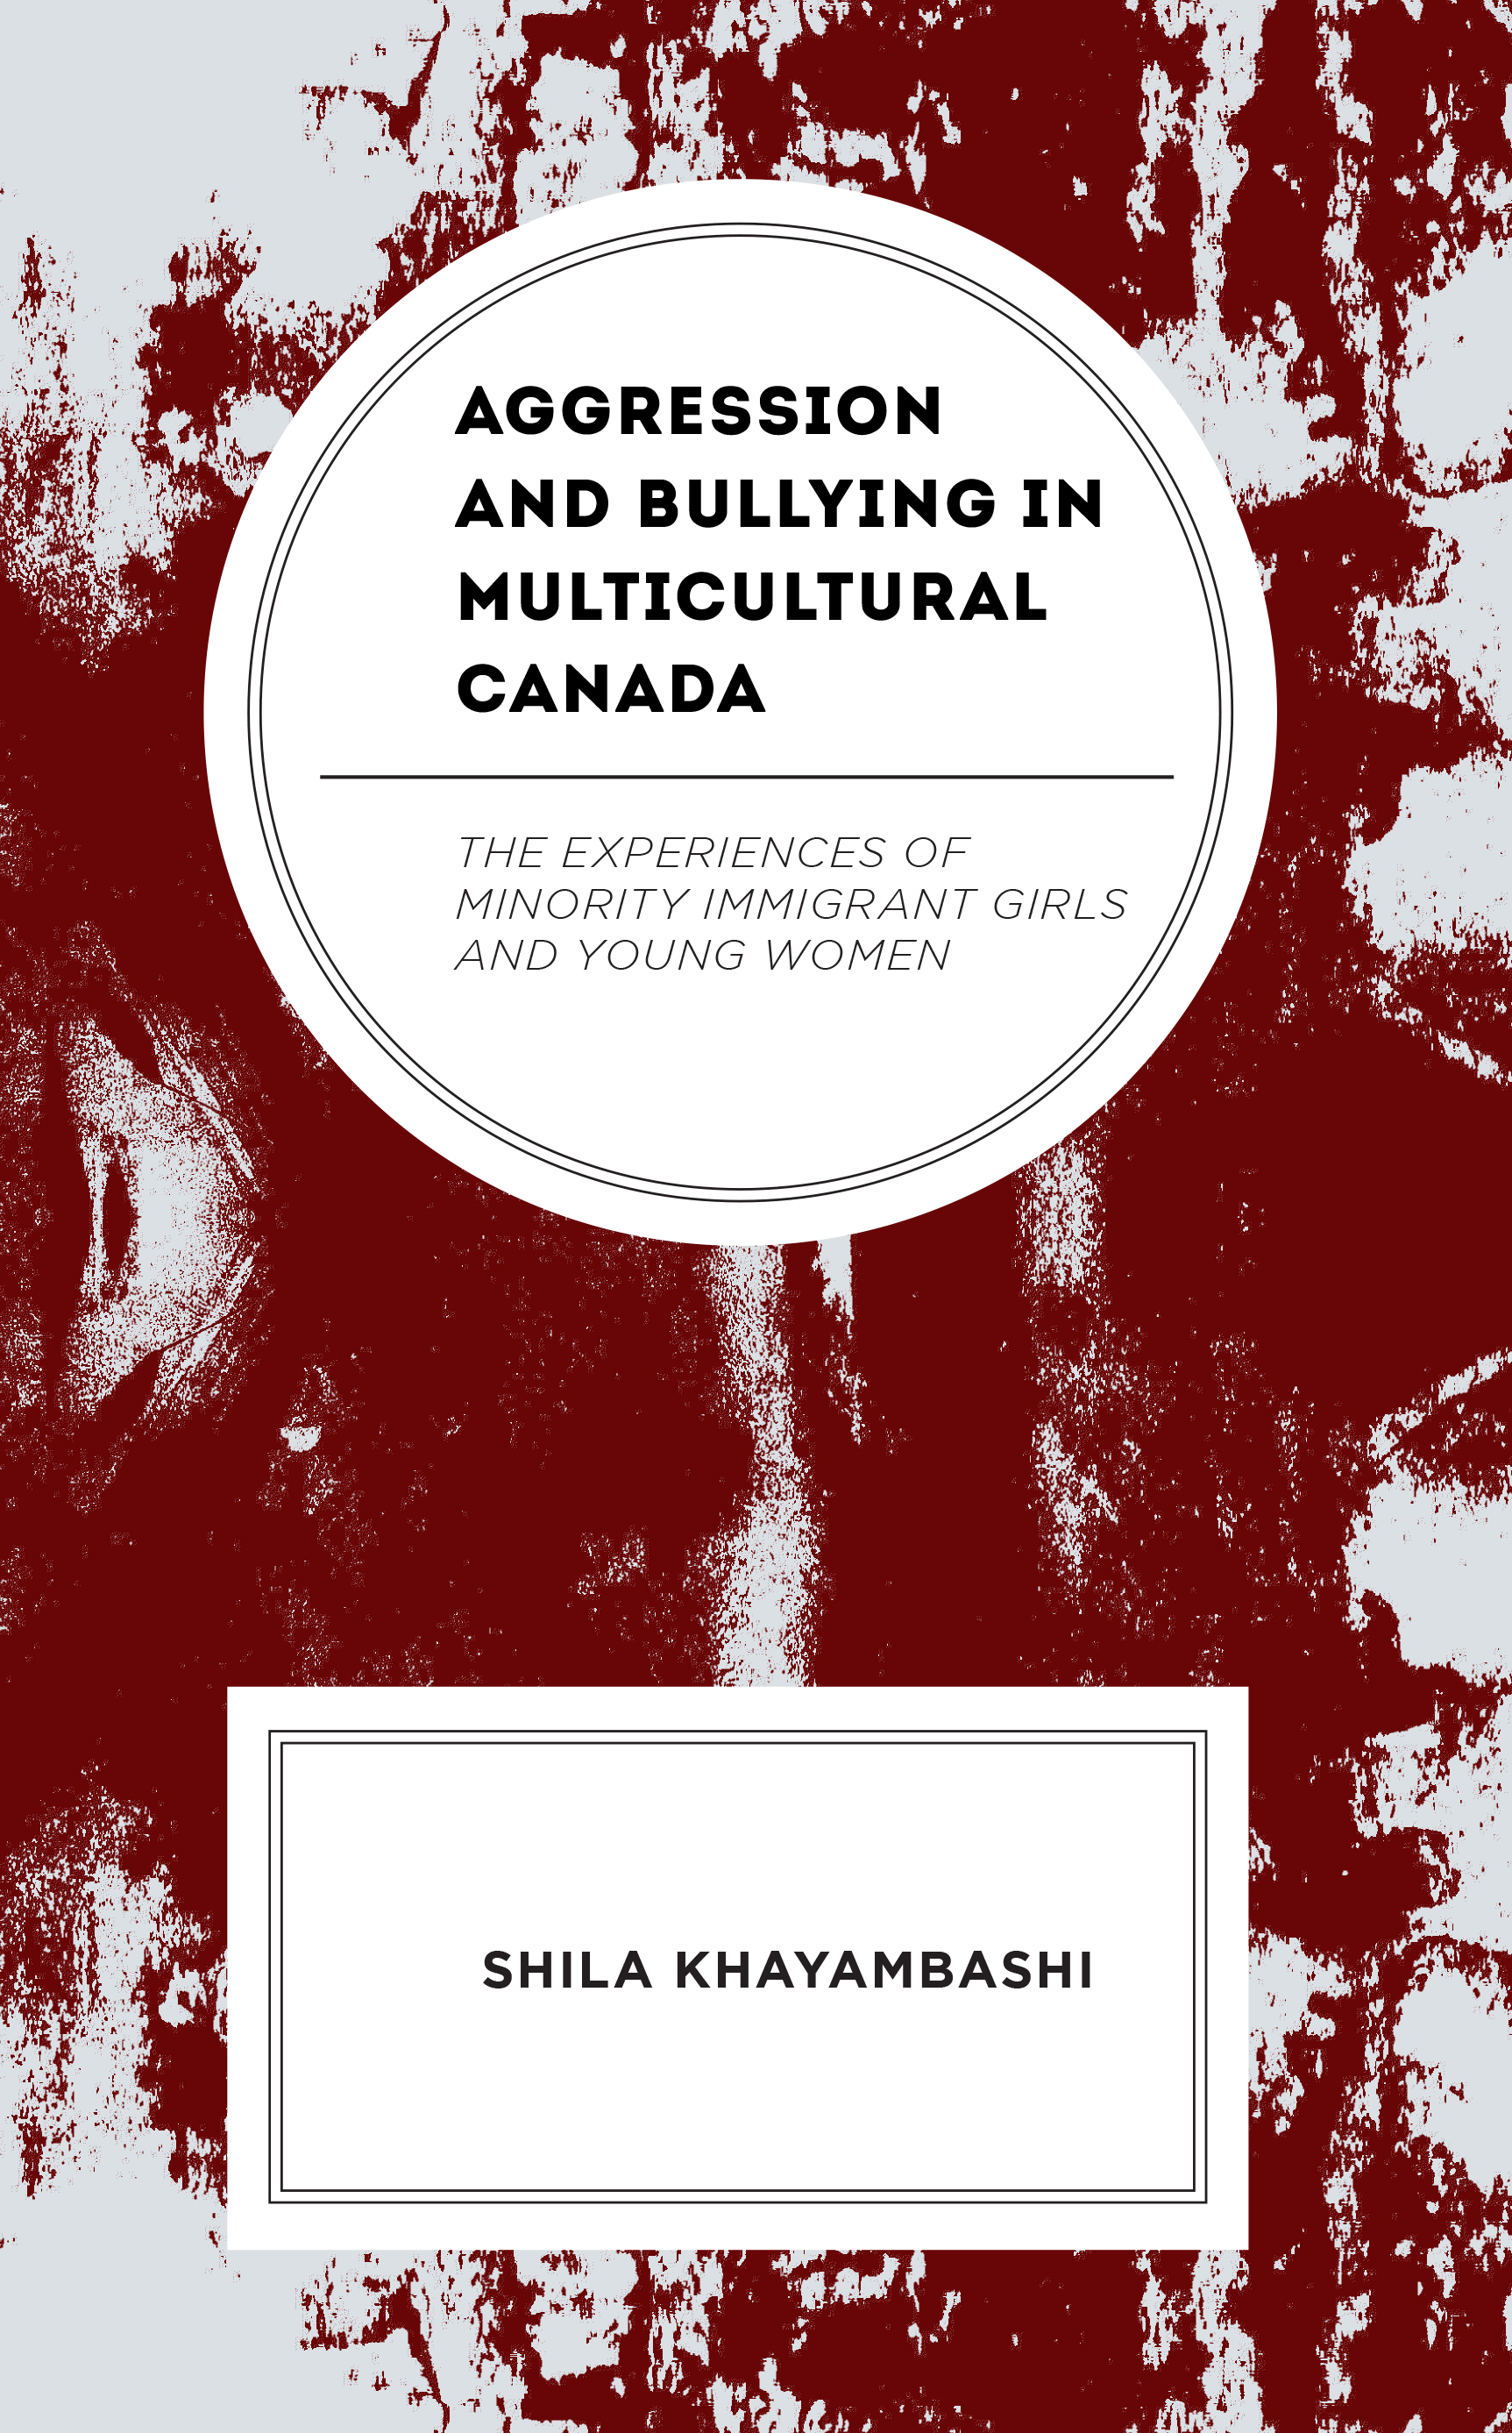 Aggression and Bullying in Multicultural Canada: The Experiences of Minority Immigrant Girls and Young Women